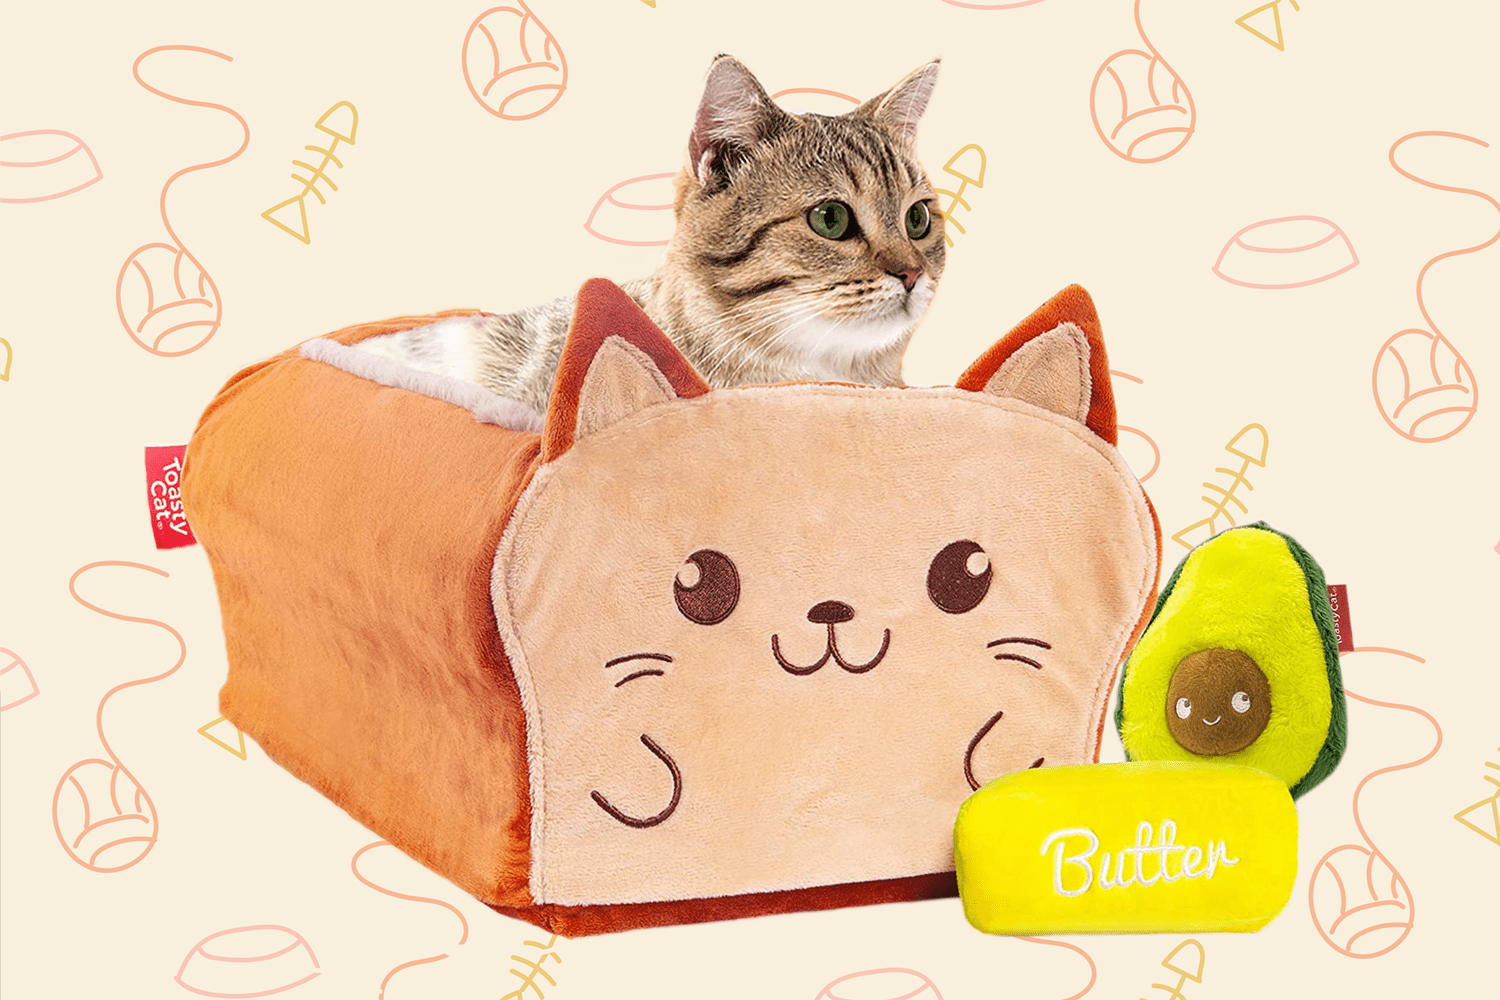 Calming Self Warming Memory Foam with Machine Washable Zip Cover Perfect for Indoor Cats and Kittens TOASTYCAT The Original Bread Cat Bed with 2 Plush Cat Toys Large XL Loaf Design Stuffs Pets